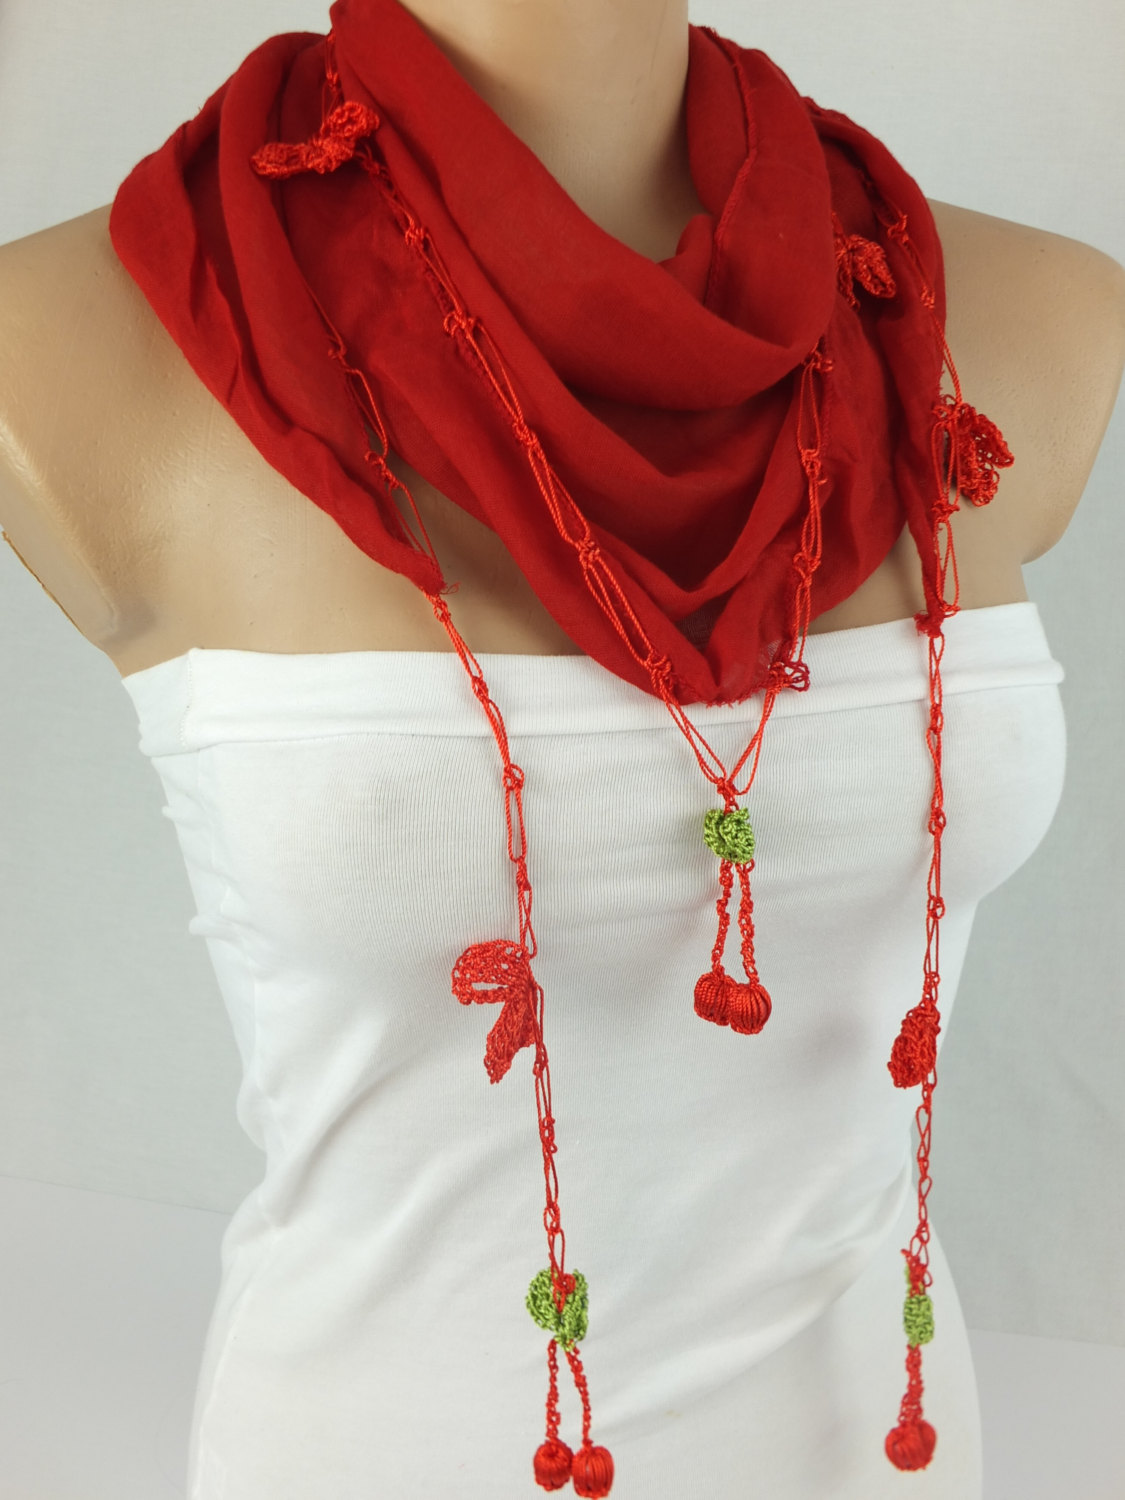 Red Scarf ,cotton Scarf With Hand Crochet Edges , Turkish Oya Scarf,scarf Necklace, Foulard,scarflette,christmas Gift